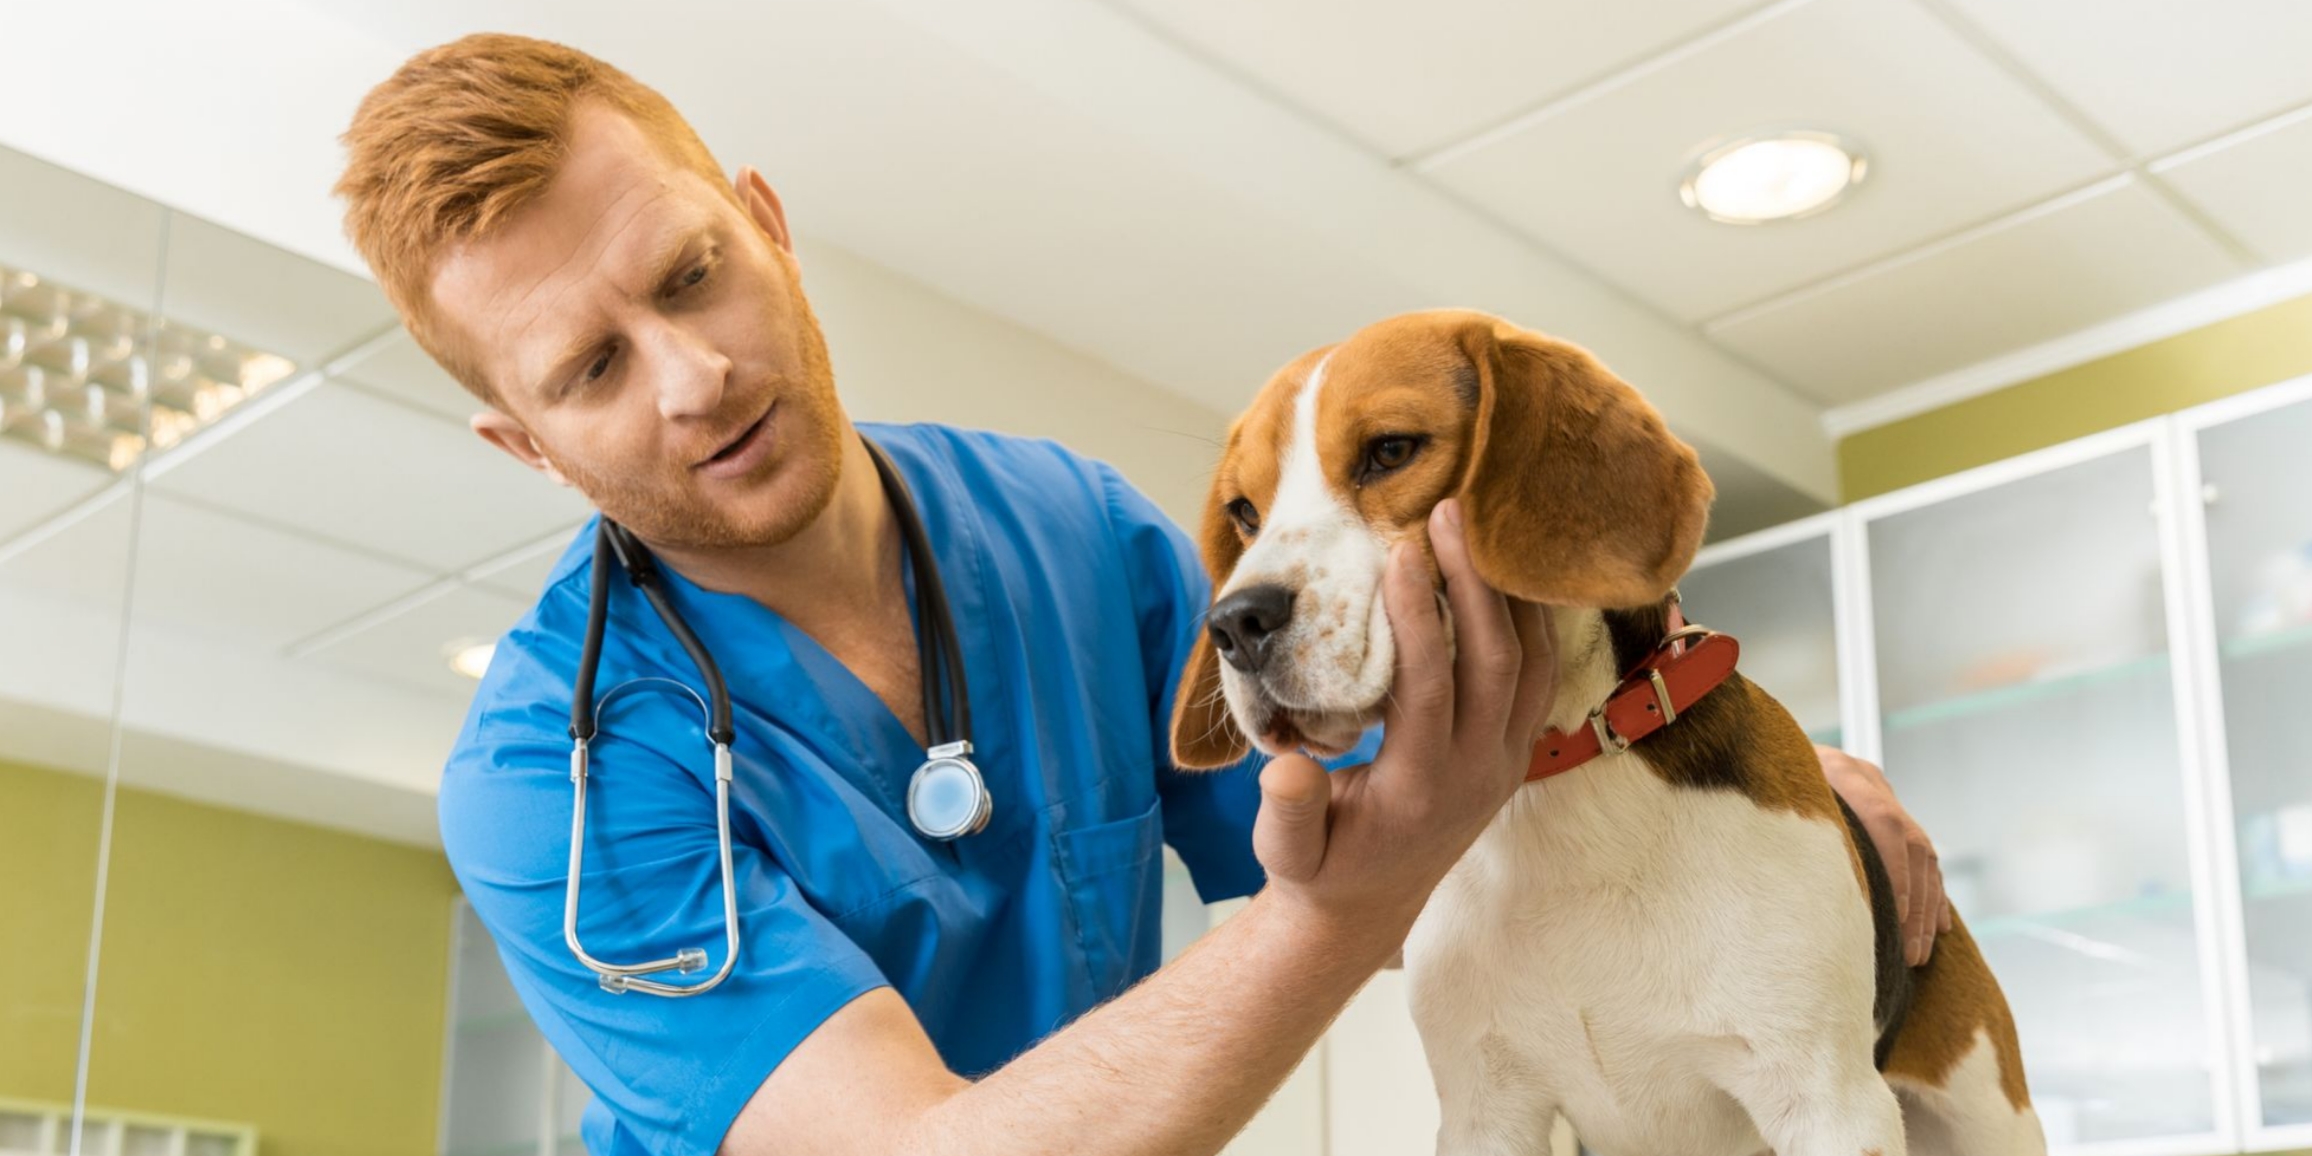 Essentials PetCare Highlights Its ‘Sunny Side of Veterinary Medicine’ Career Opportunities at VMX 2022 in Orlando